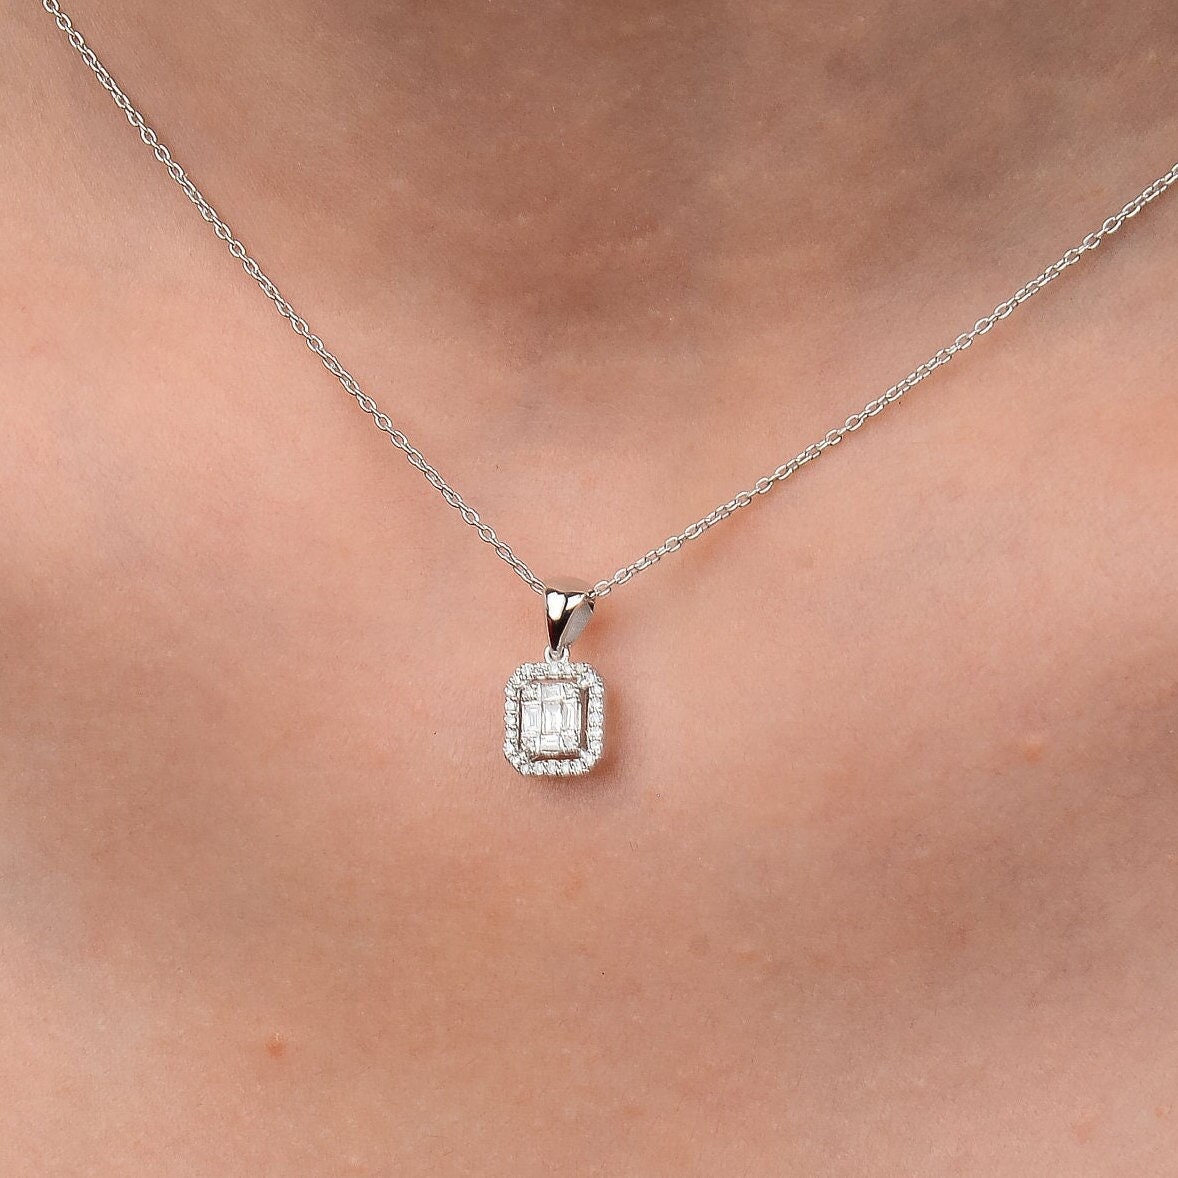 Baguette and Pave Diamond Necklace, Diamonds in White Gold Drop Necklace, Diamond Cut Pendant, Bridal Necklace, Bride Necklace, Wife Gift